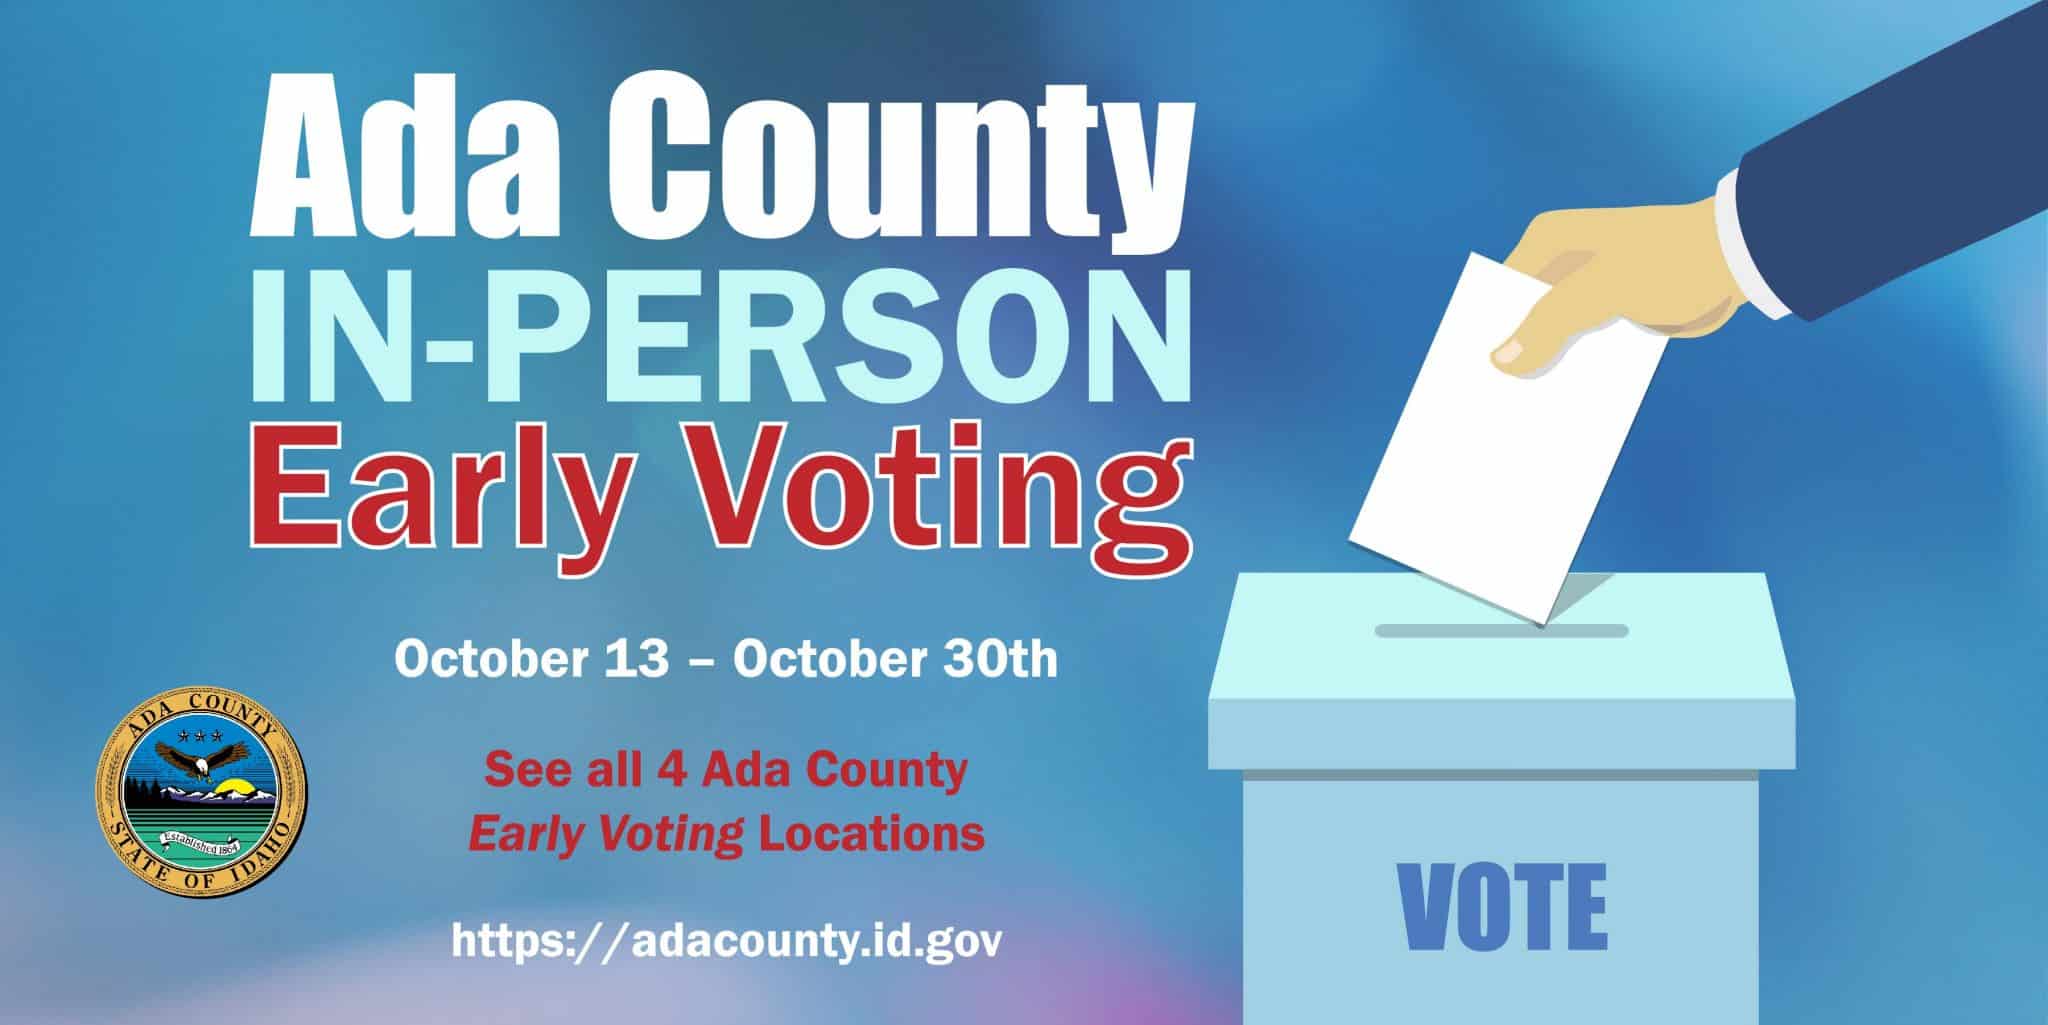 Early Voting in Ada County